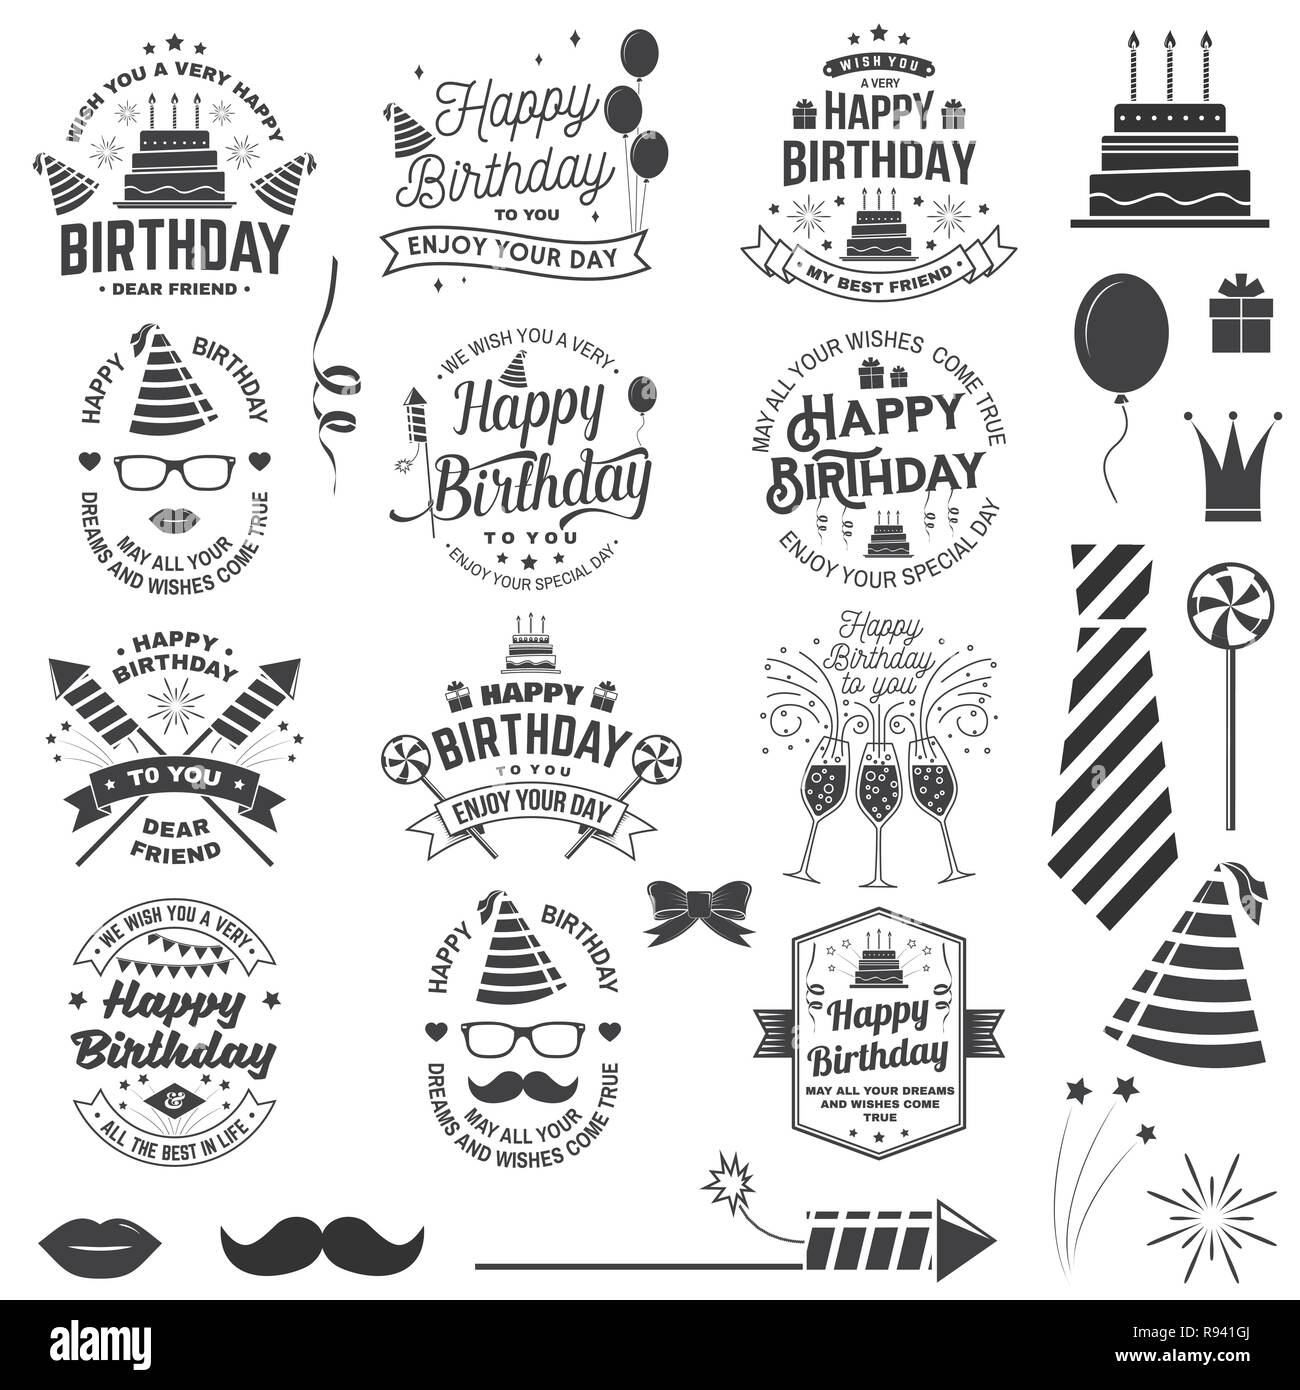 Set of Happy Birthday templates for overlay, badge, sticker, card with bunch of balloons, gifts, firework rockets and birthday cake with candles. Vector. Vintage design for birthday celebration Stock Vector